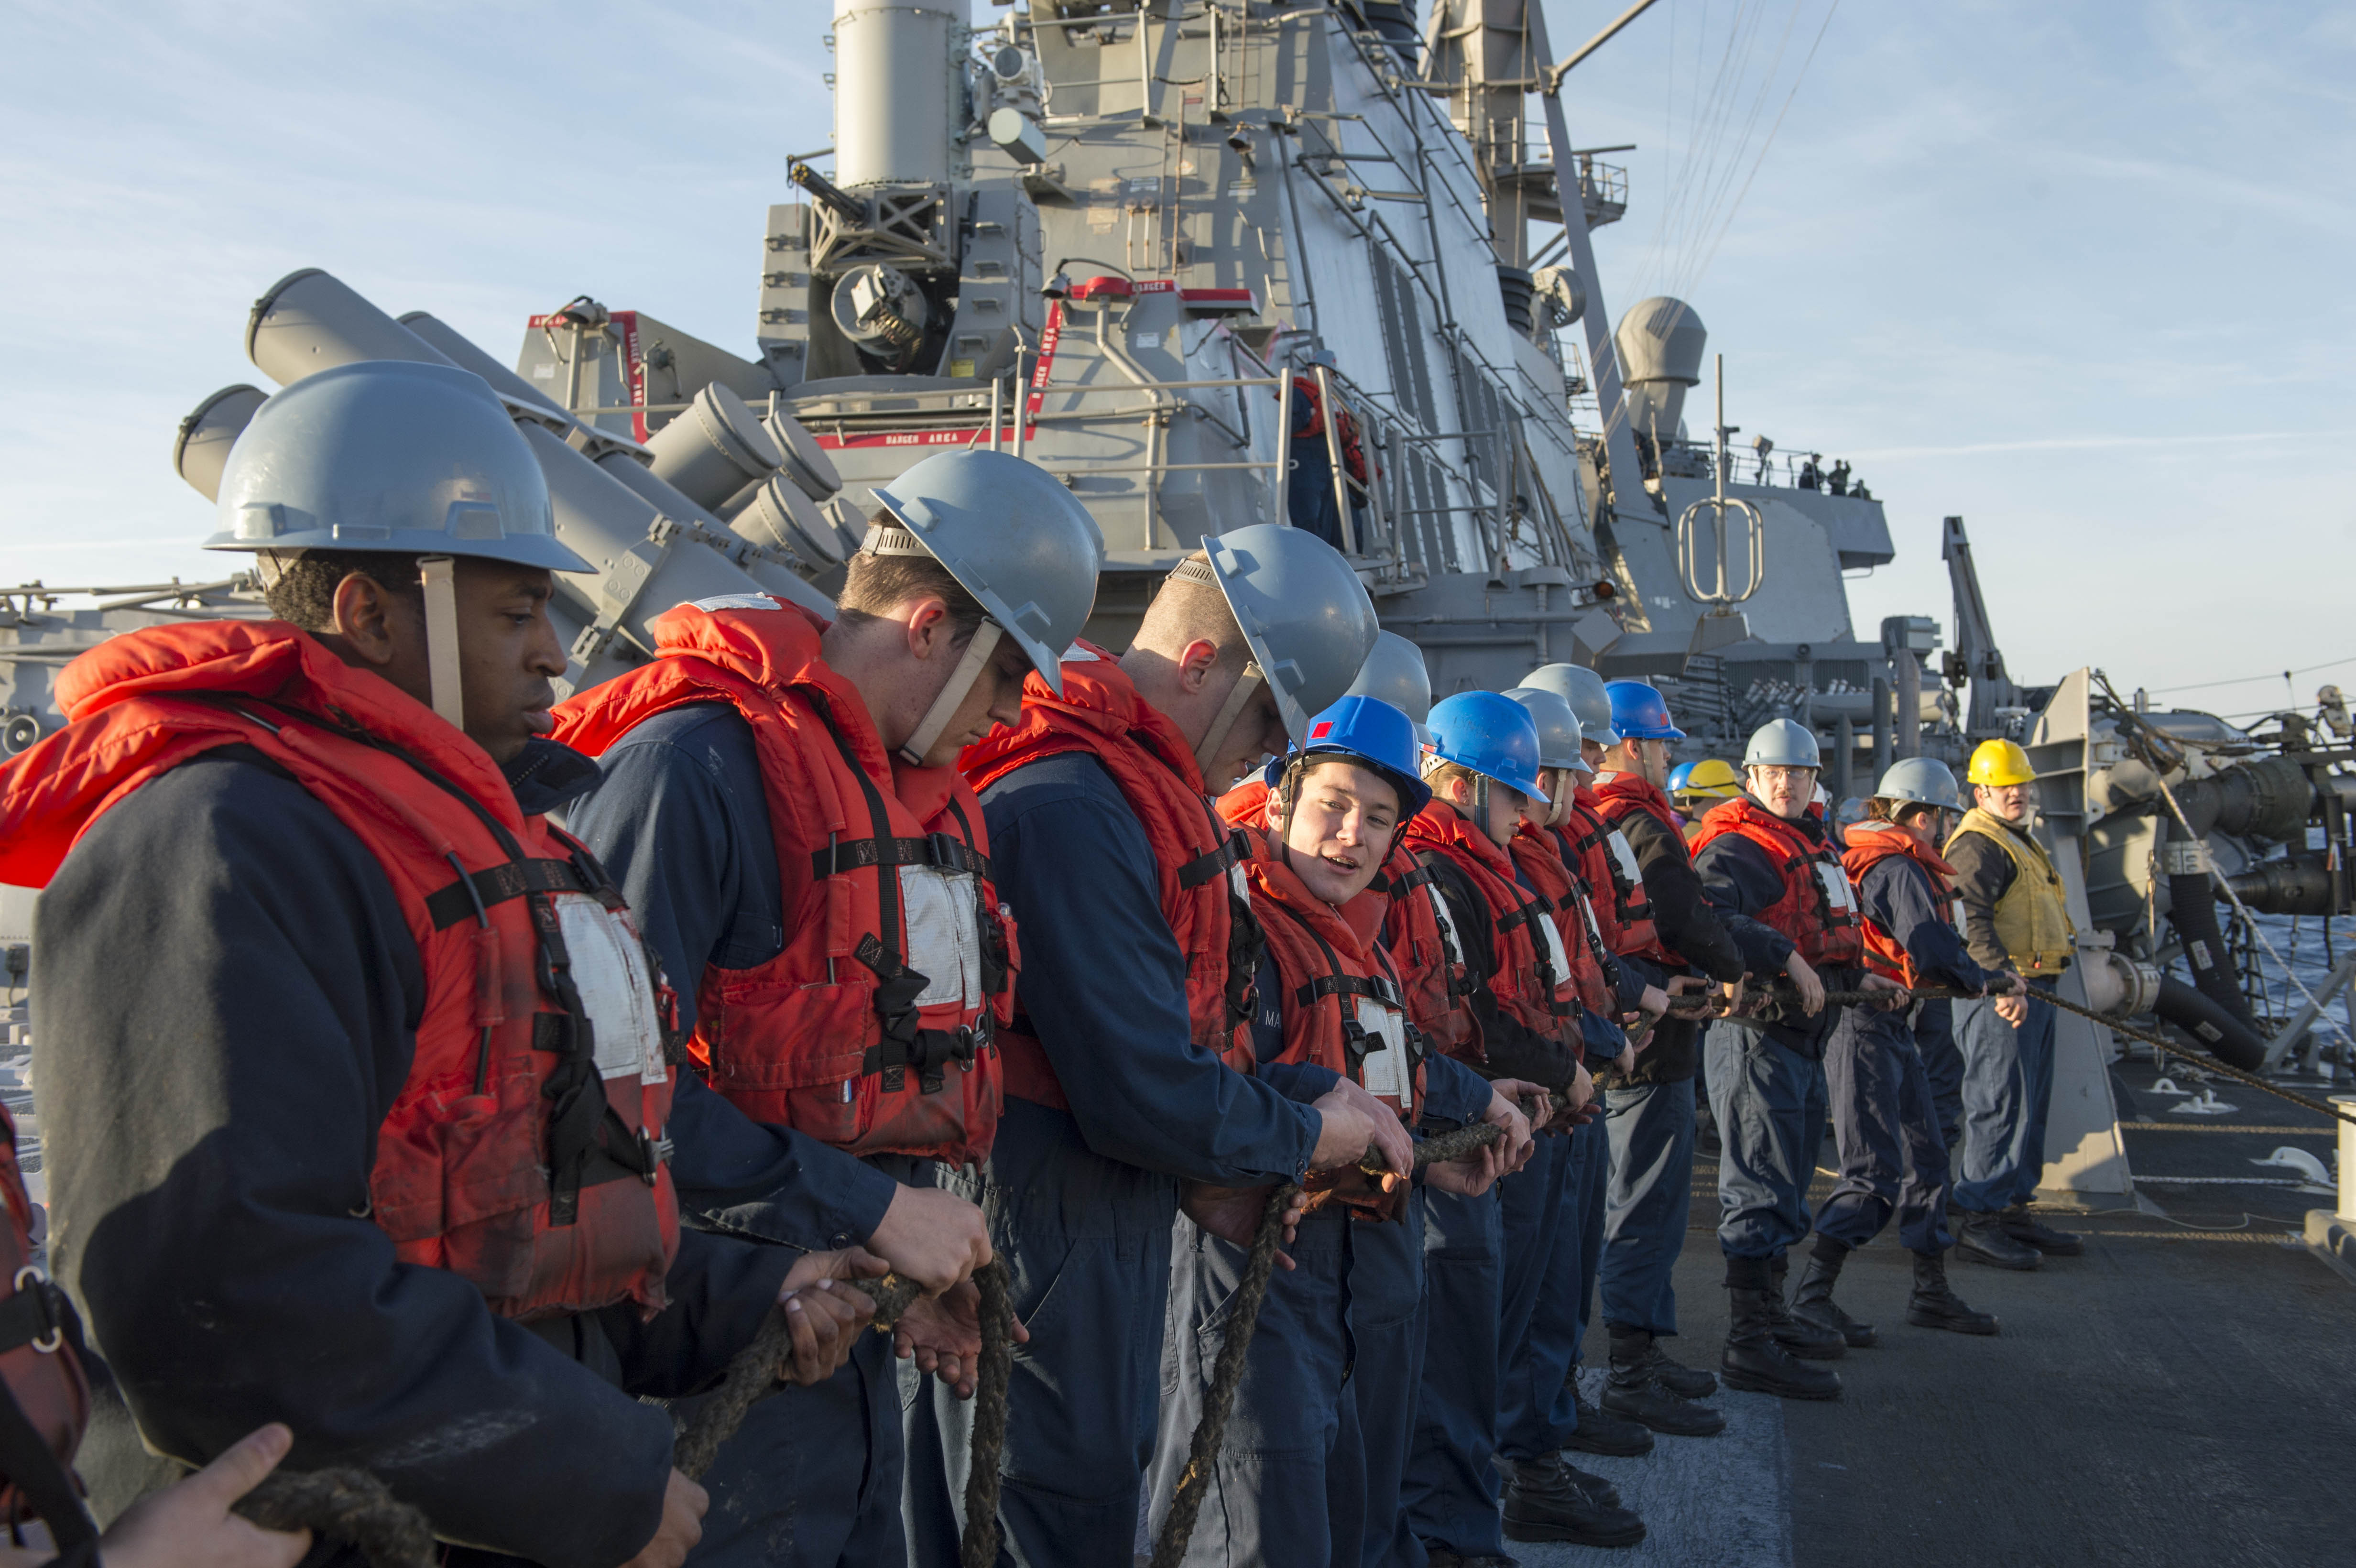 Sailors in life jacket lining up holding the rope on the ship